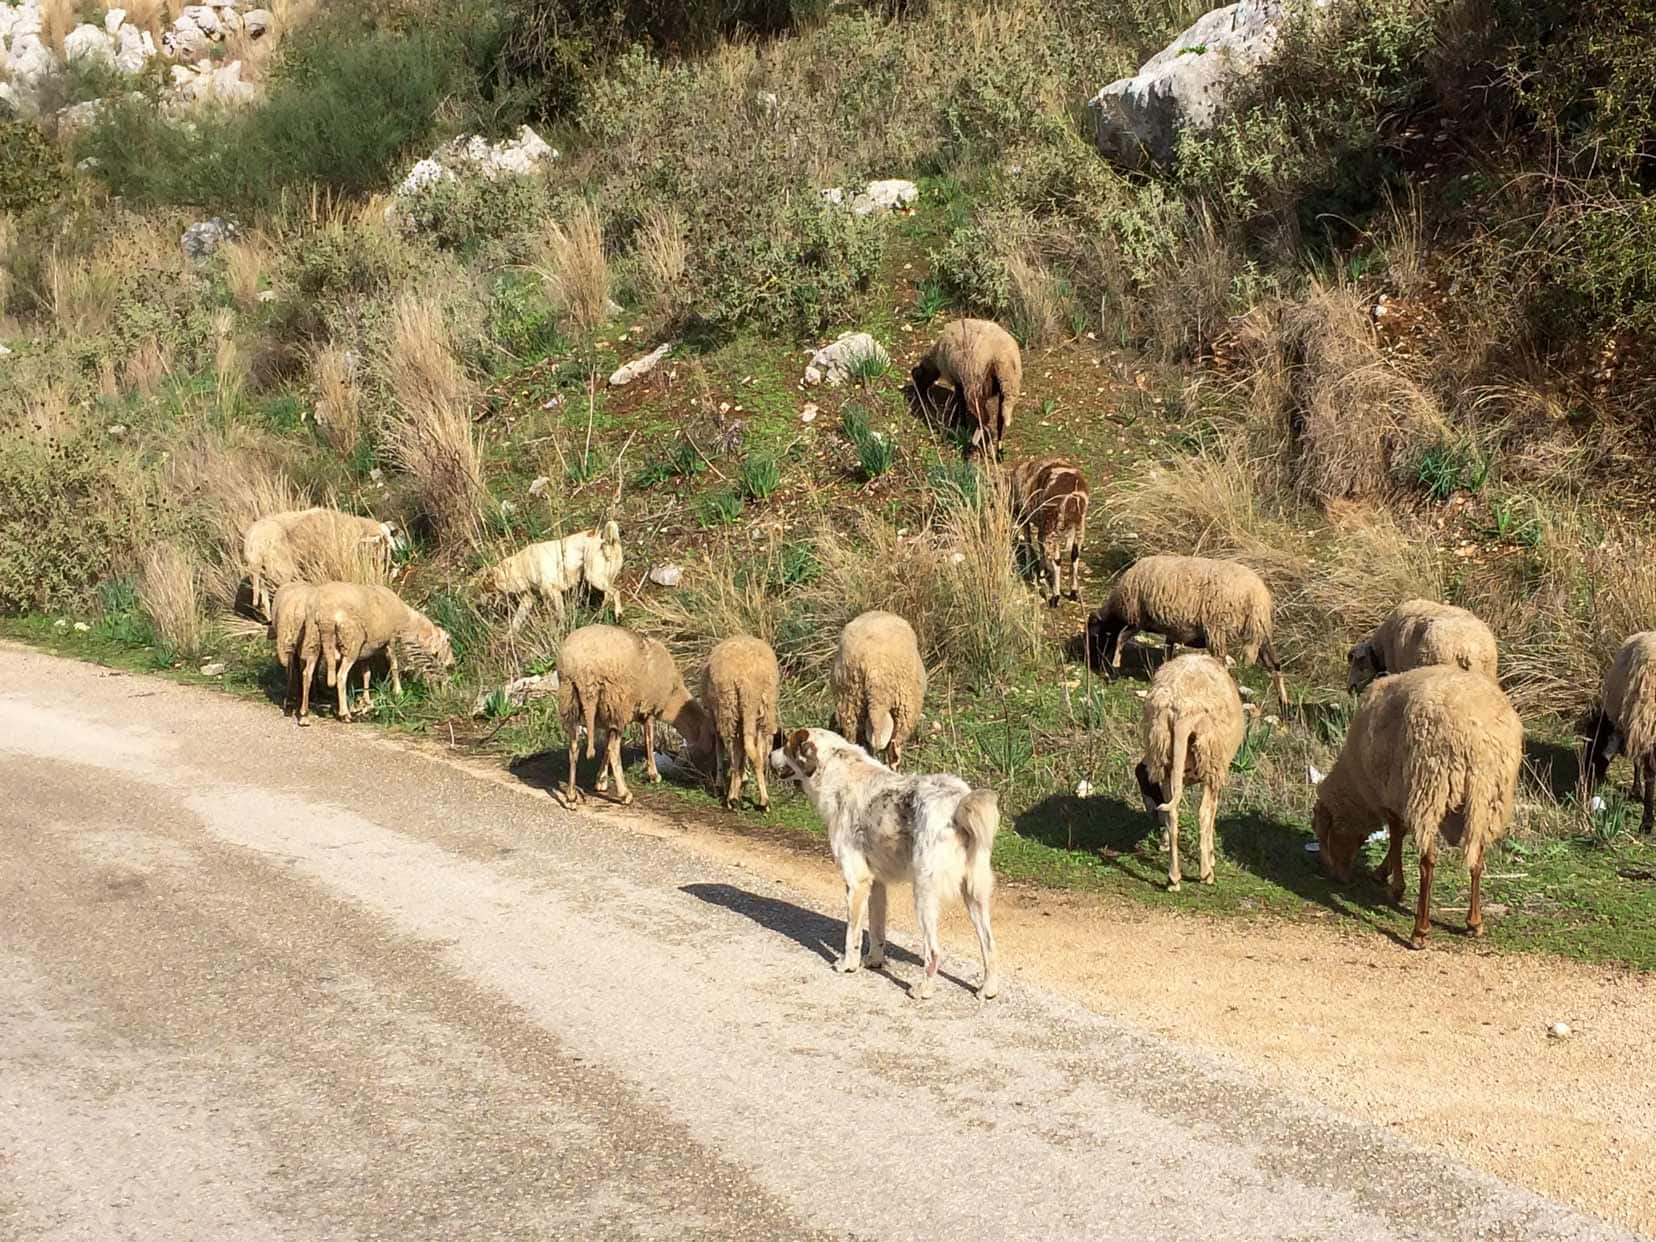 _dog-guarding-sheep along the side of a road 